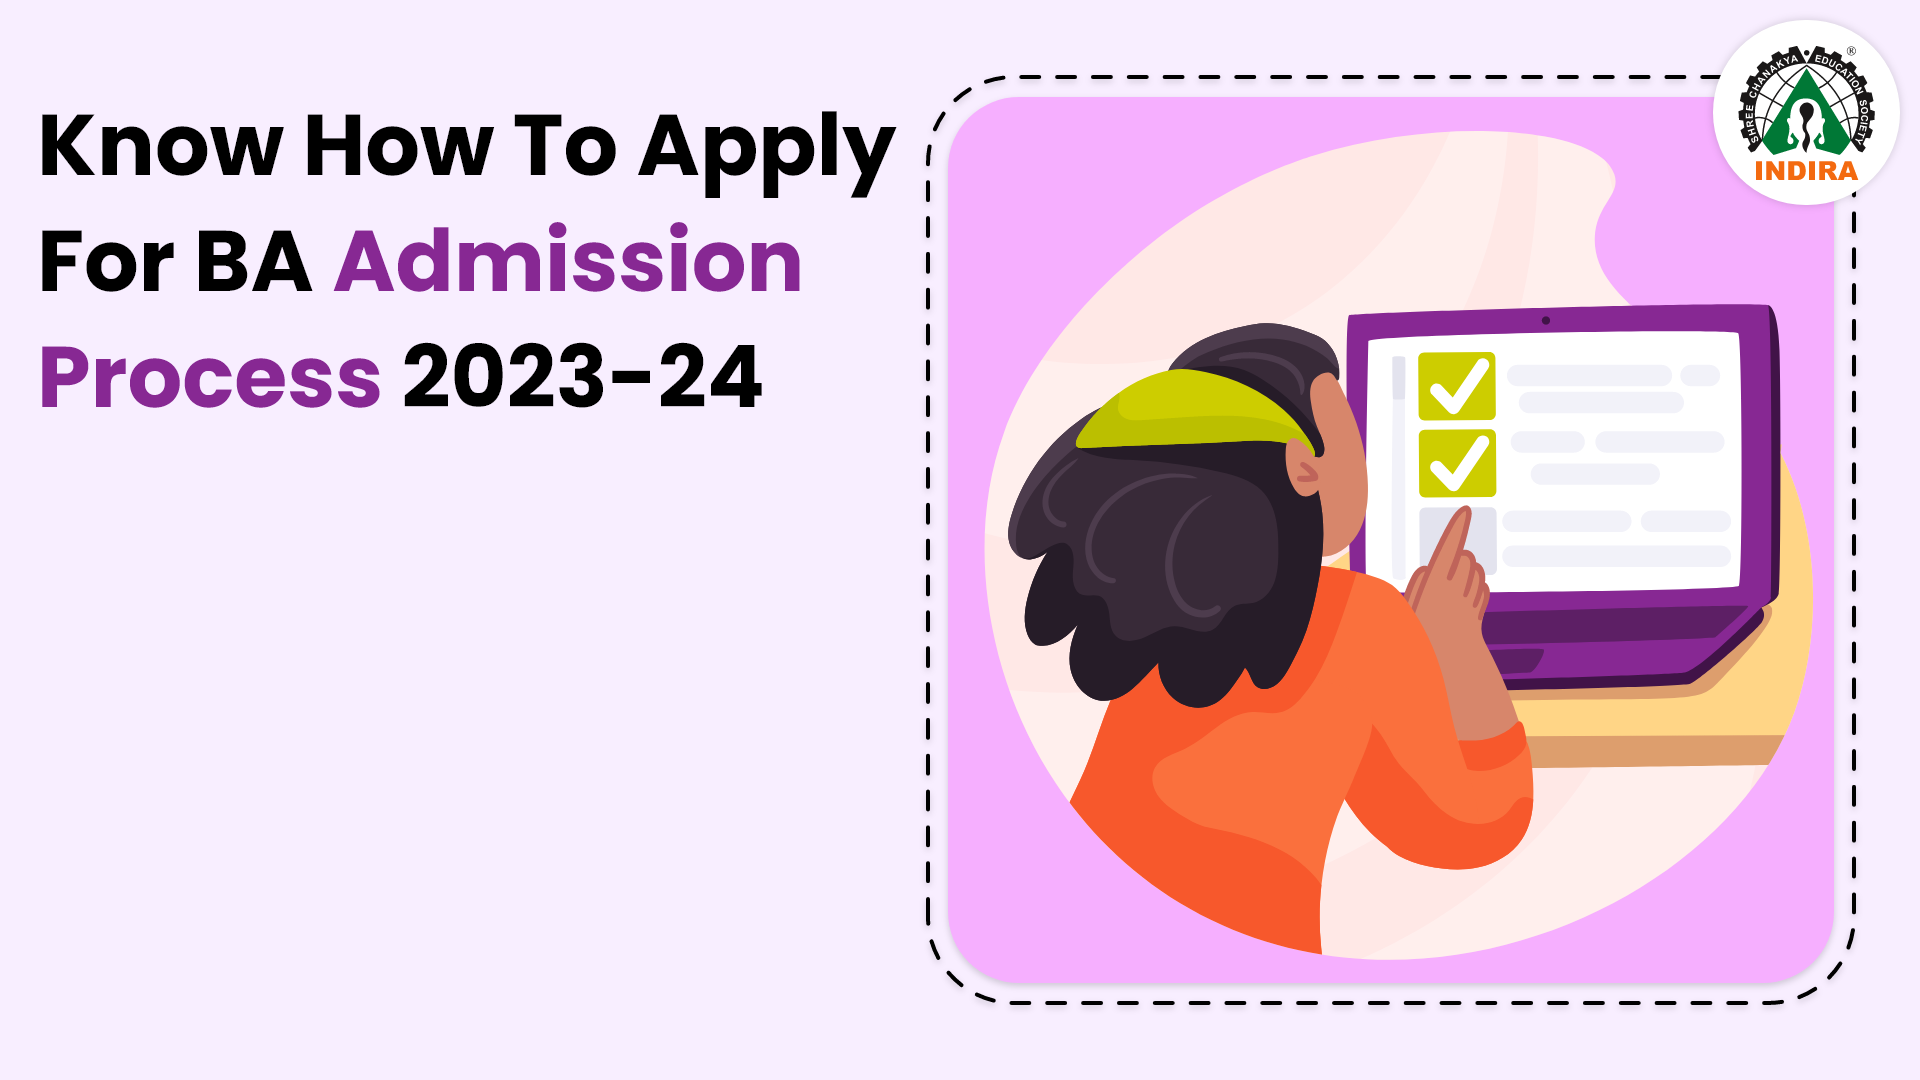 Know How To Apply For BA Admission Process 2023-24